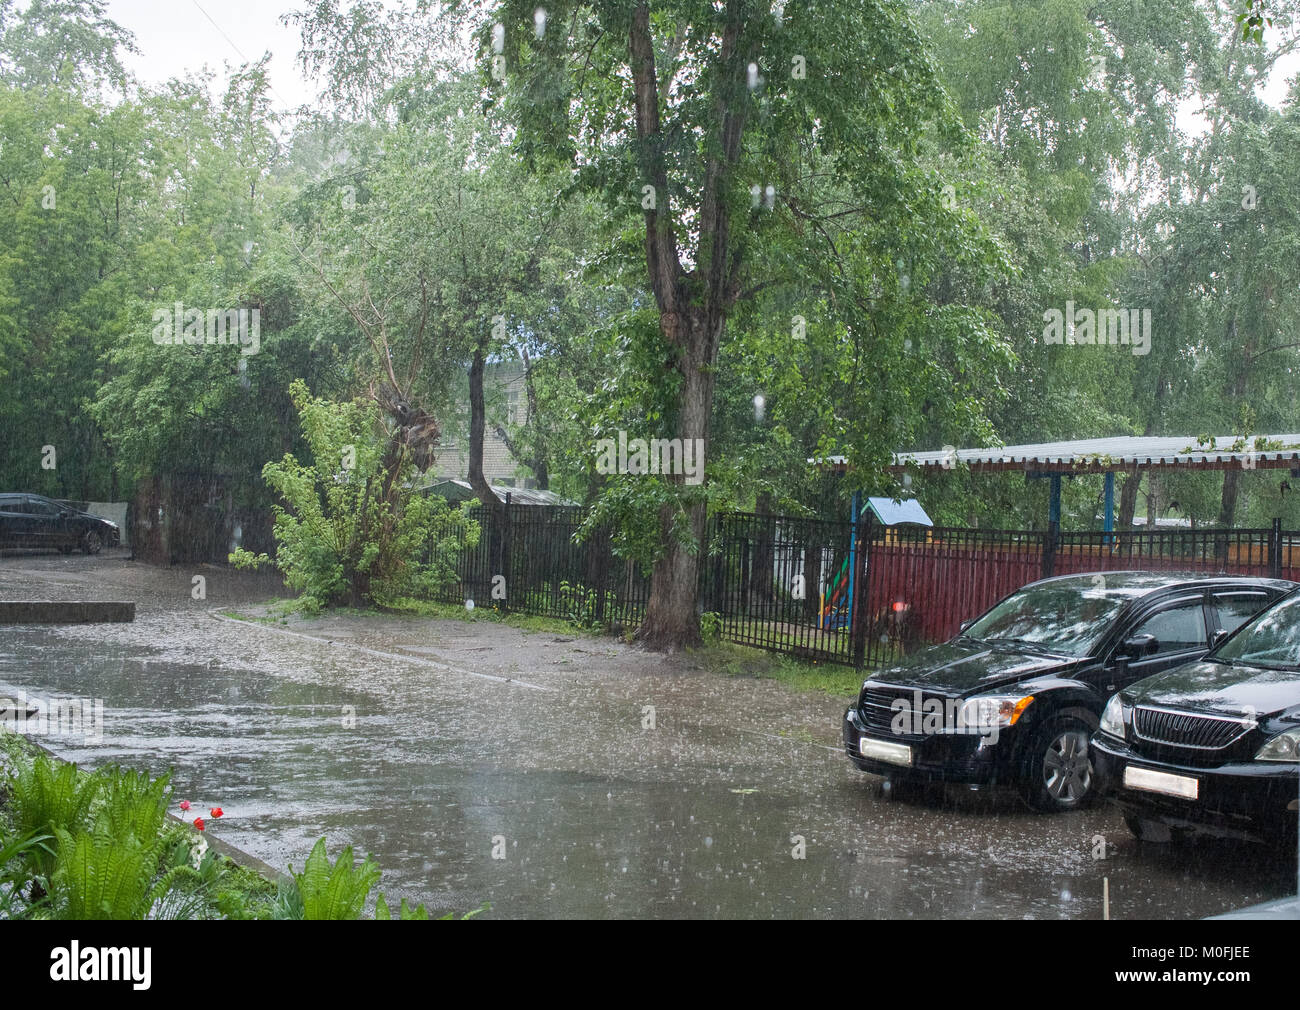 Summer pouring rain in the city. Small courtyard with asphalt way and black cars. Stock Photo